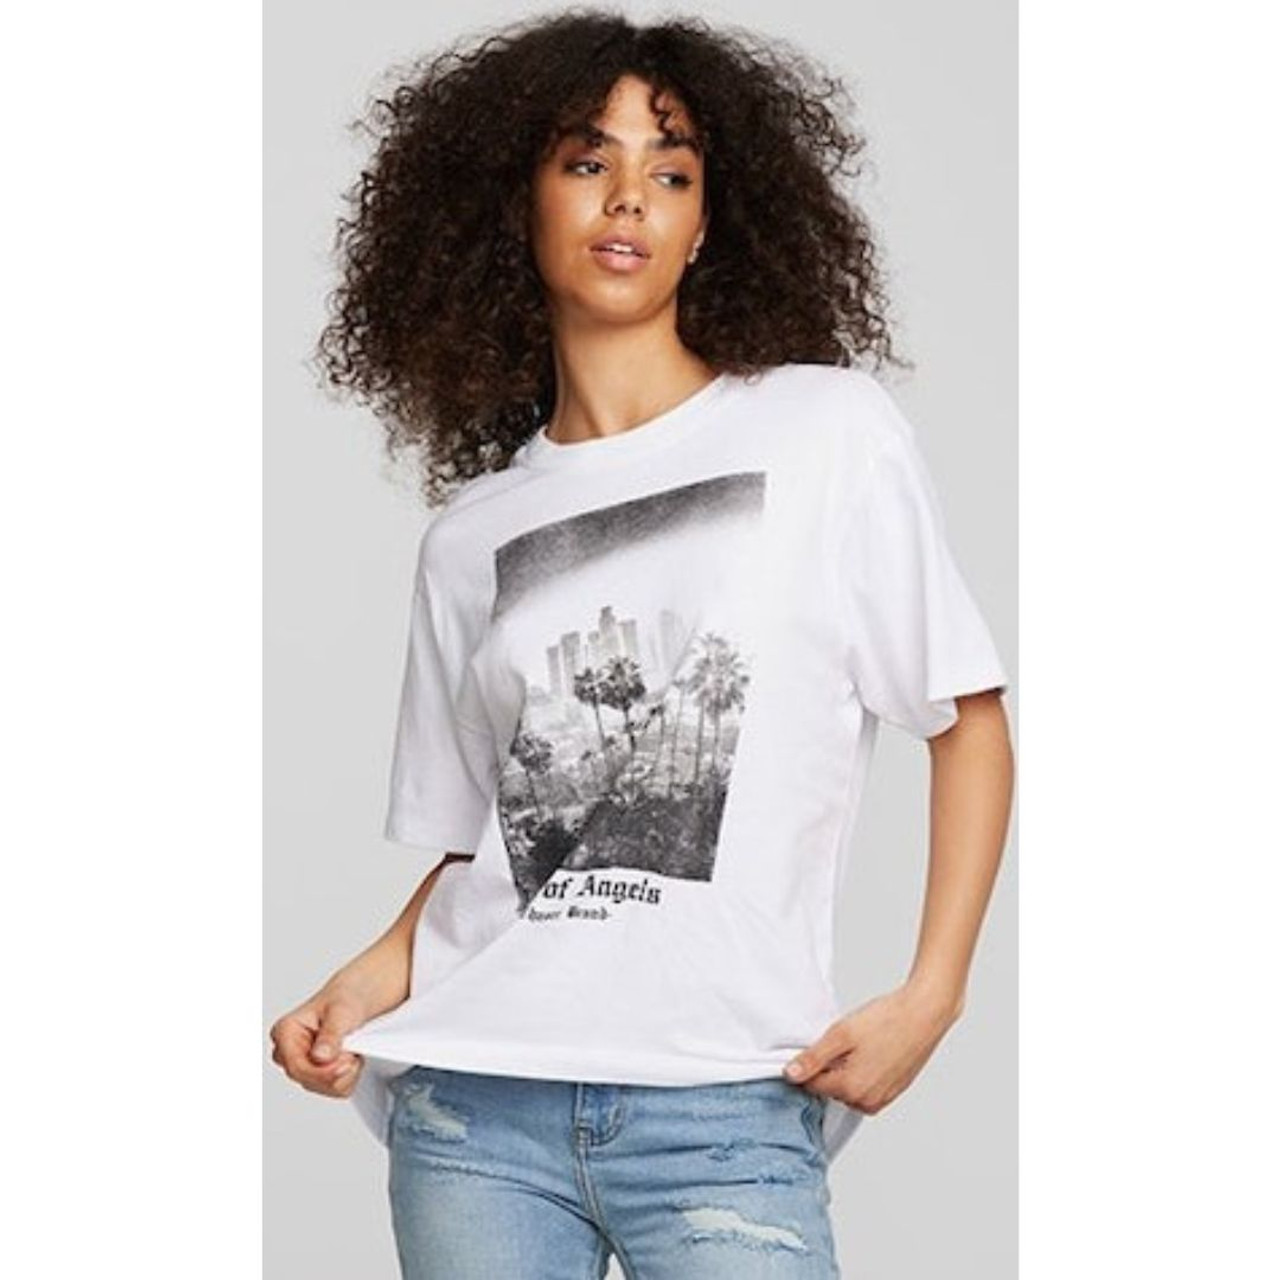 Chaser Brand City of Angels Photograph Women's T-Shirt